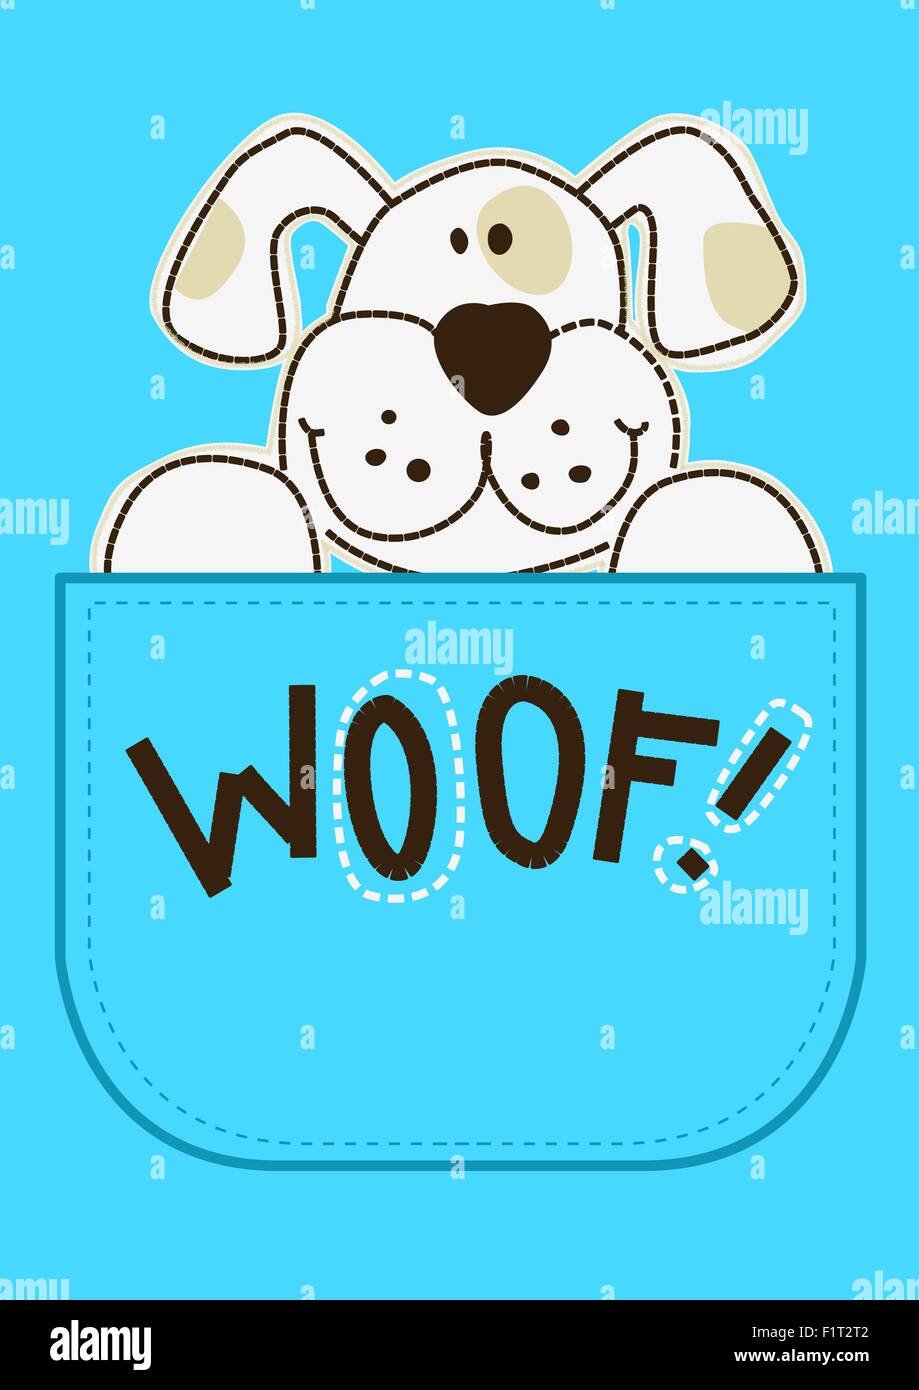 Woof Stock Vector Images - Alamy